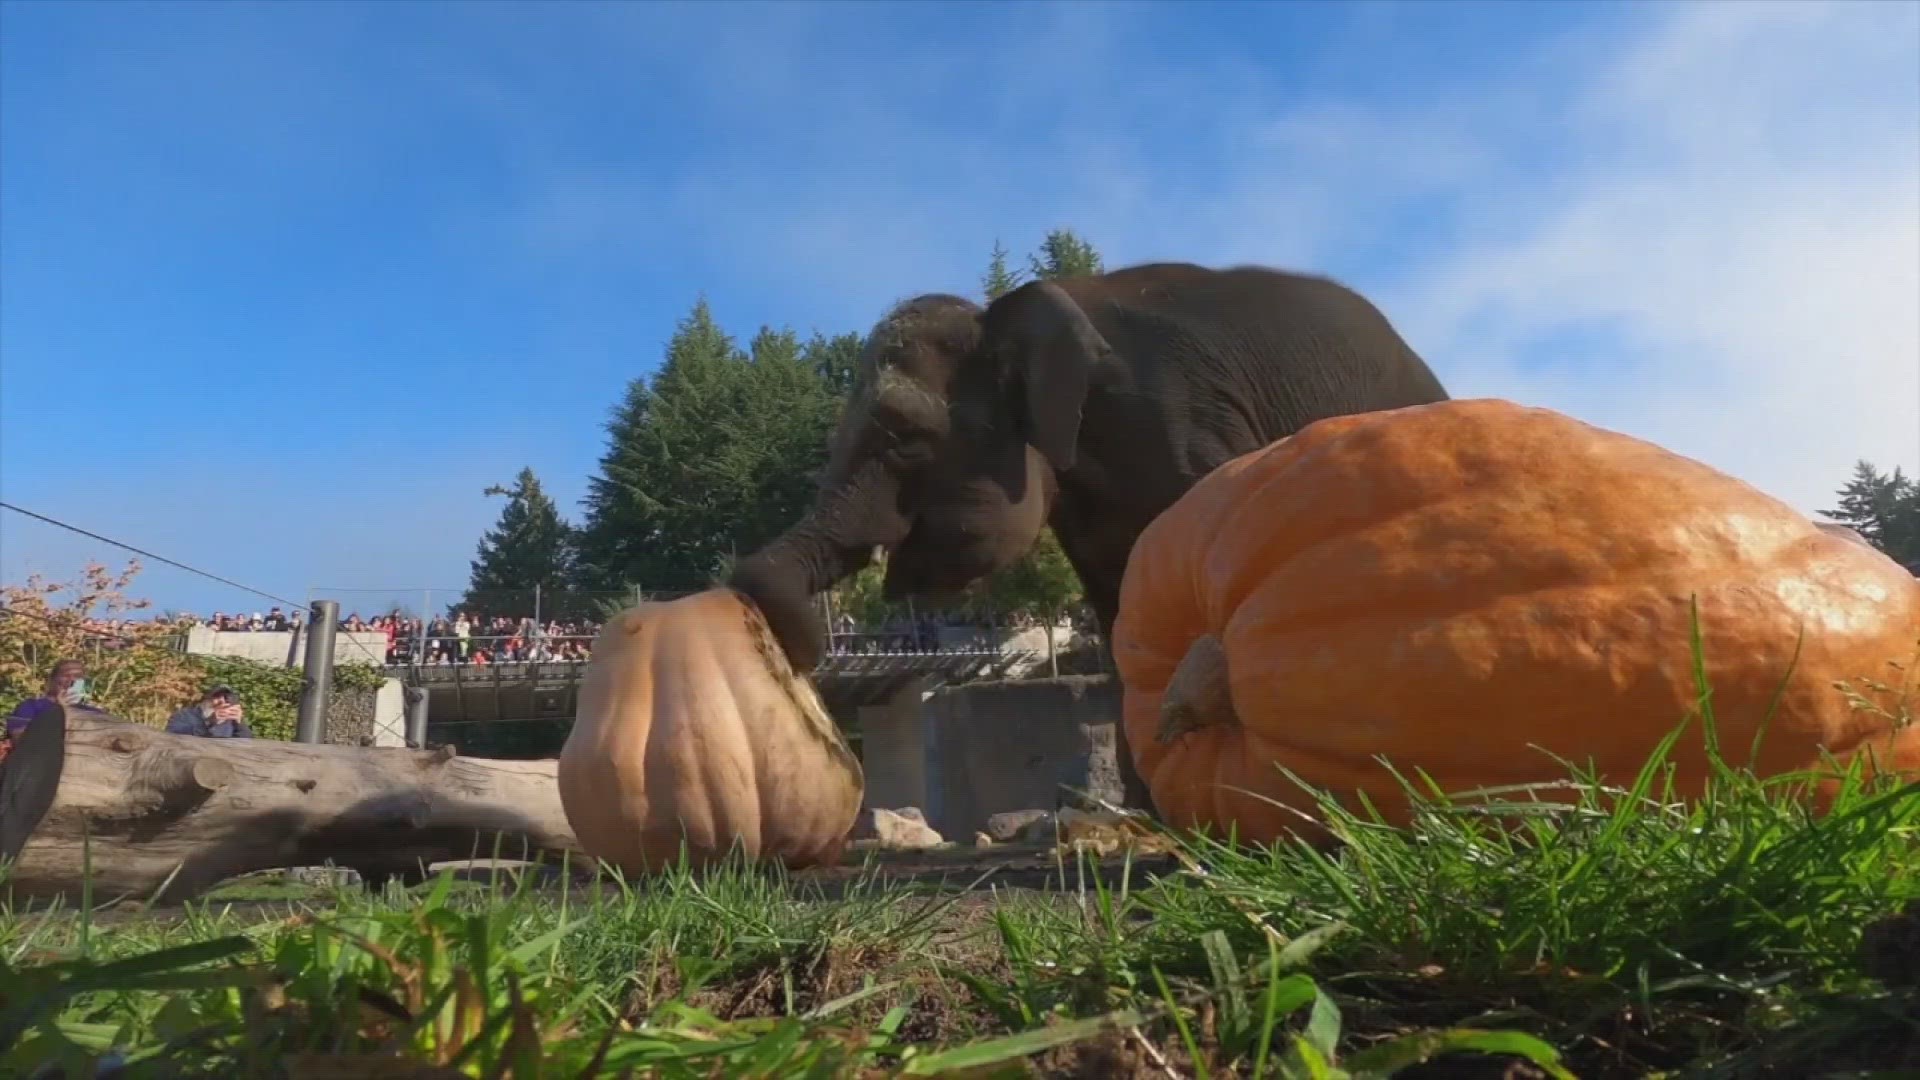 Every year for 25 years, elephants stomp on squash with their feet at this Oregon Zoo.